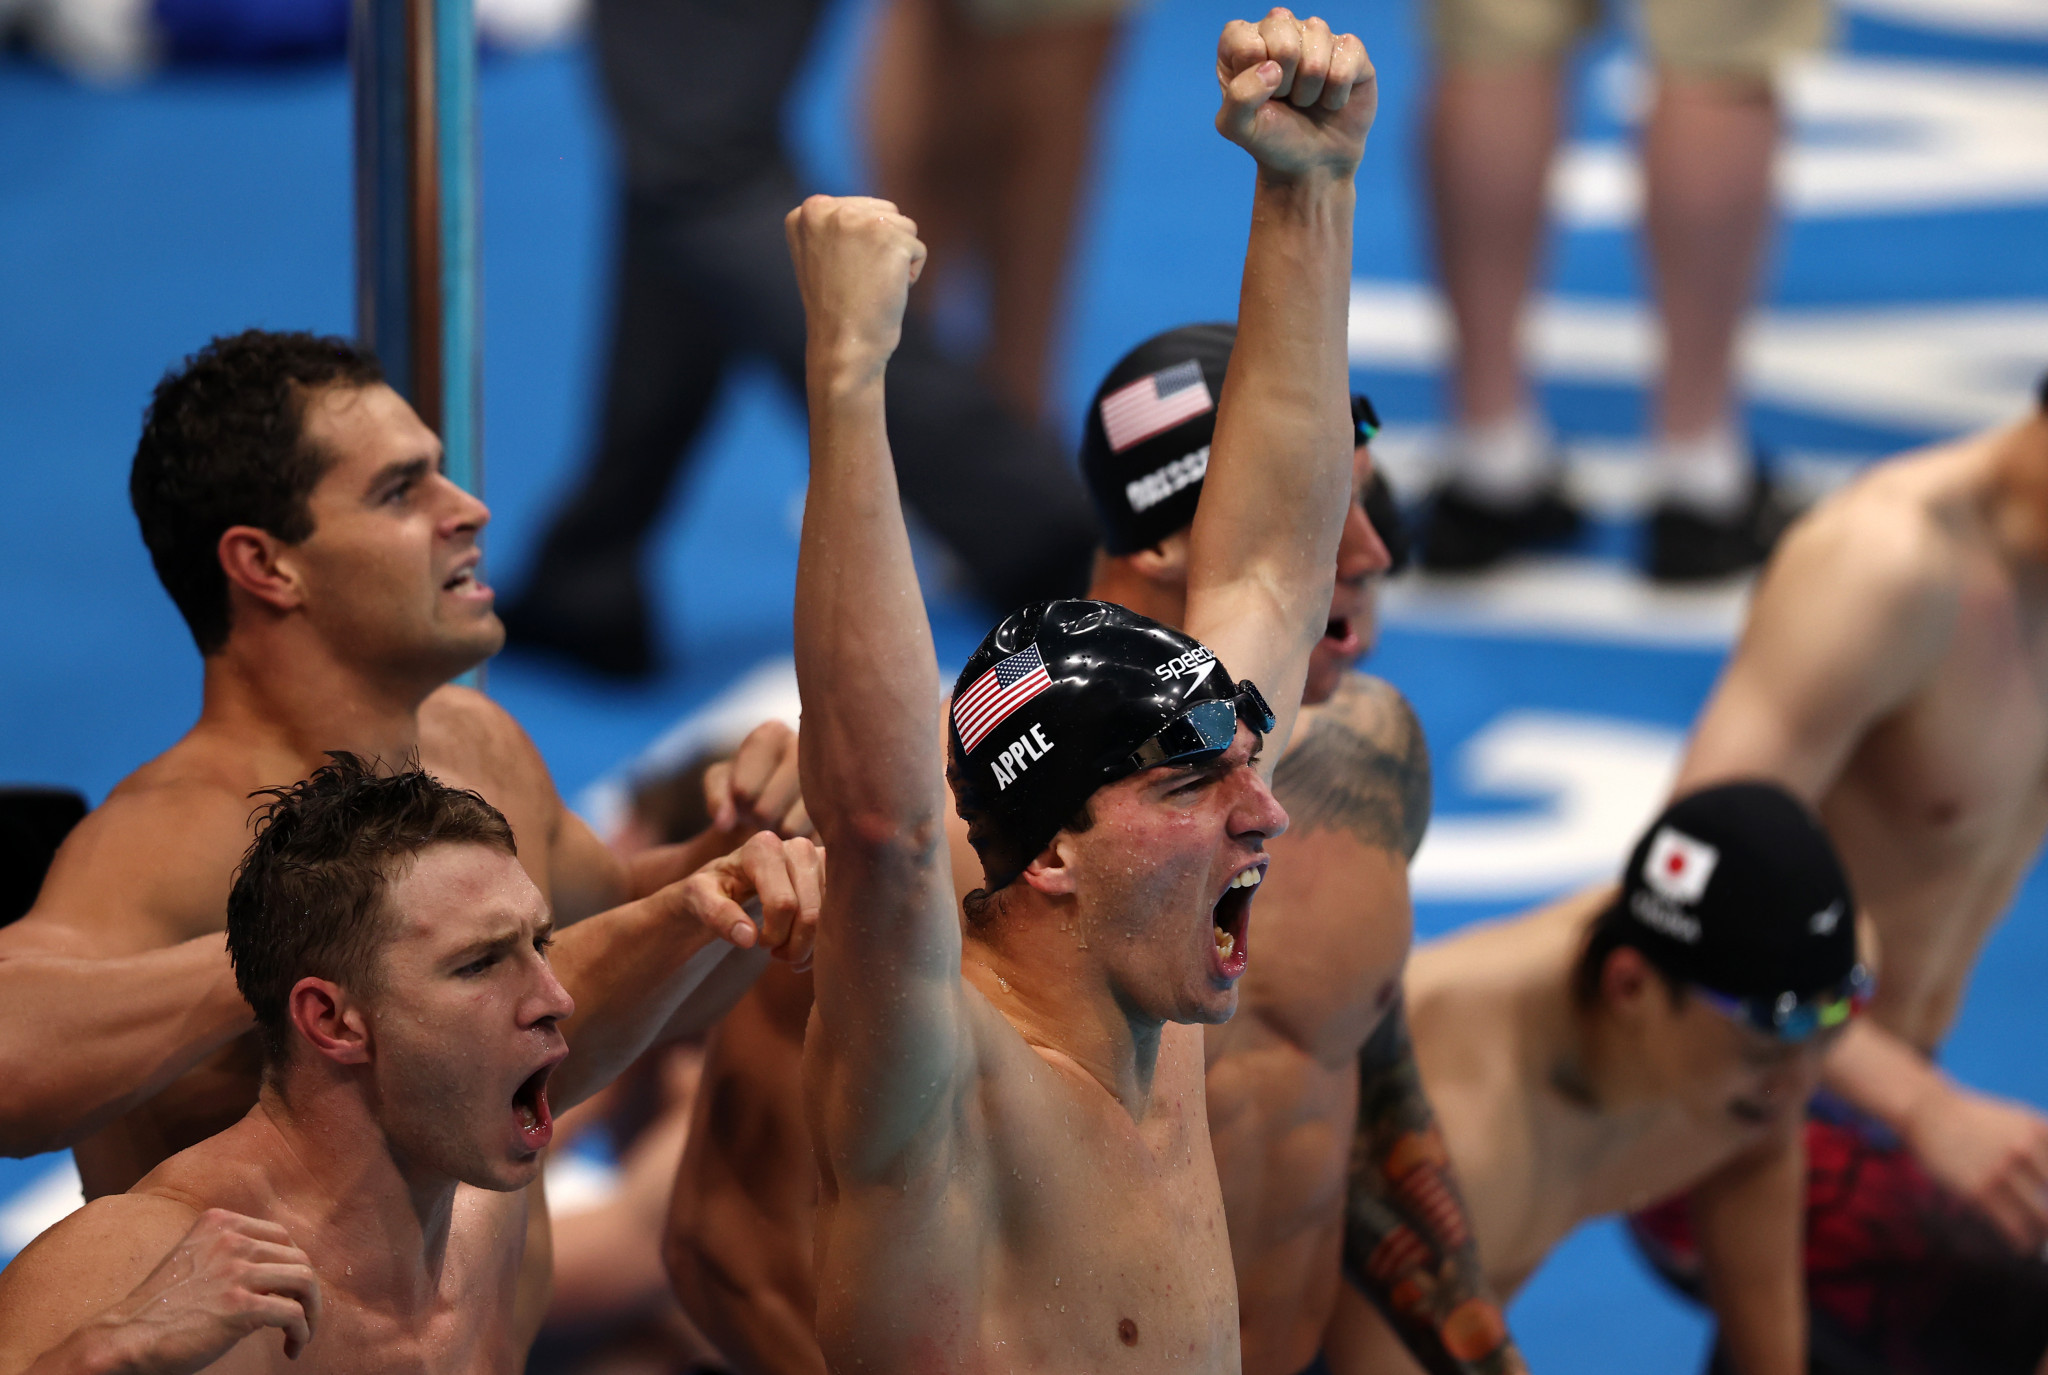 The US won 11 golds at Tokyo 2020, and have been a dominant force in Olympic swimming ©Getty Images